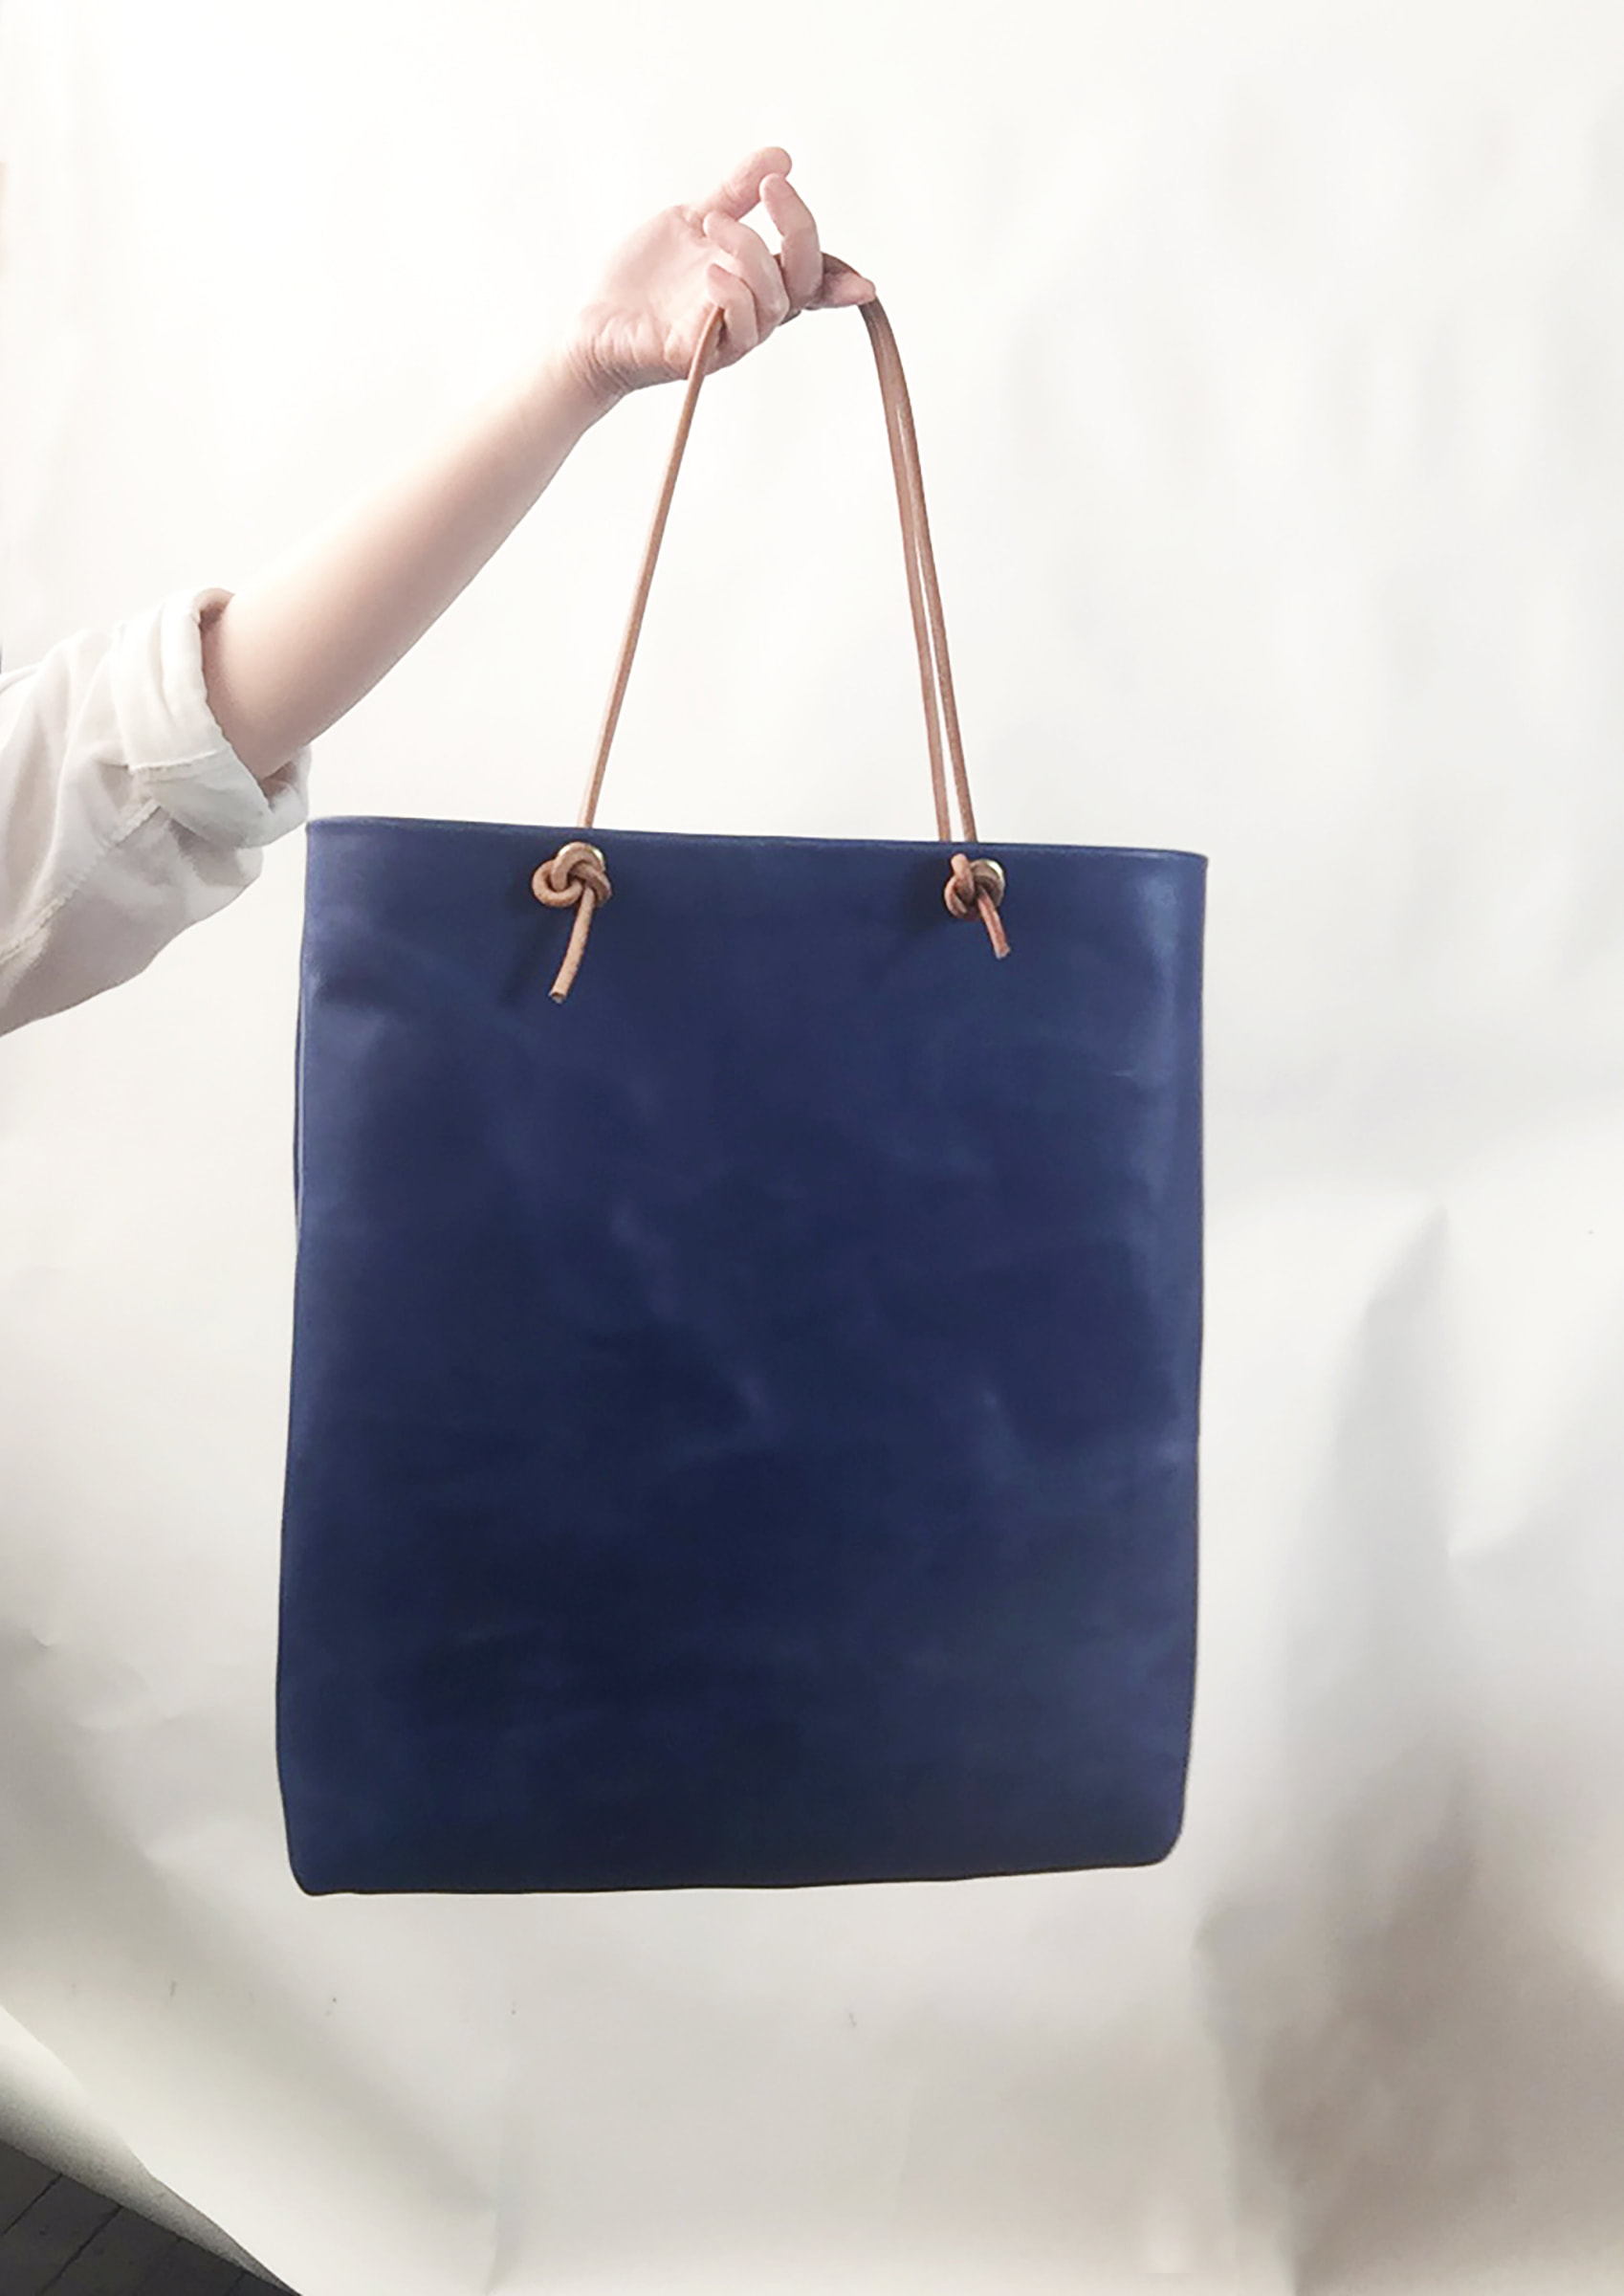 Bartleby Objects - Morris Tote